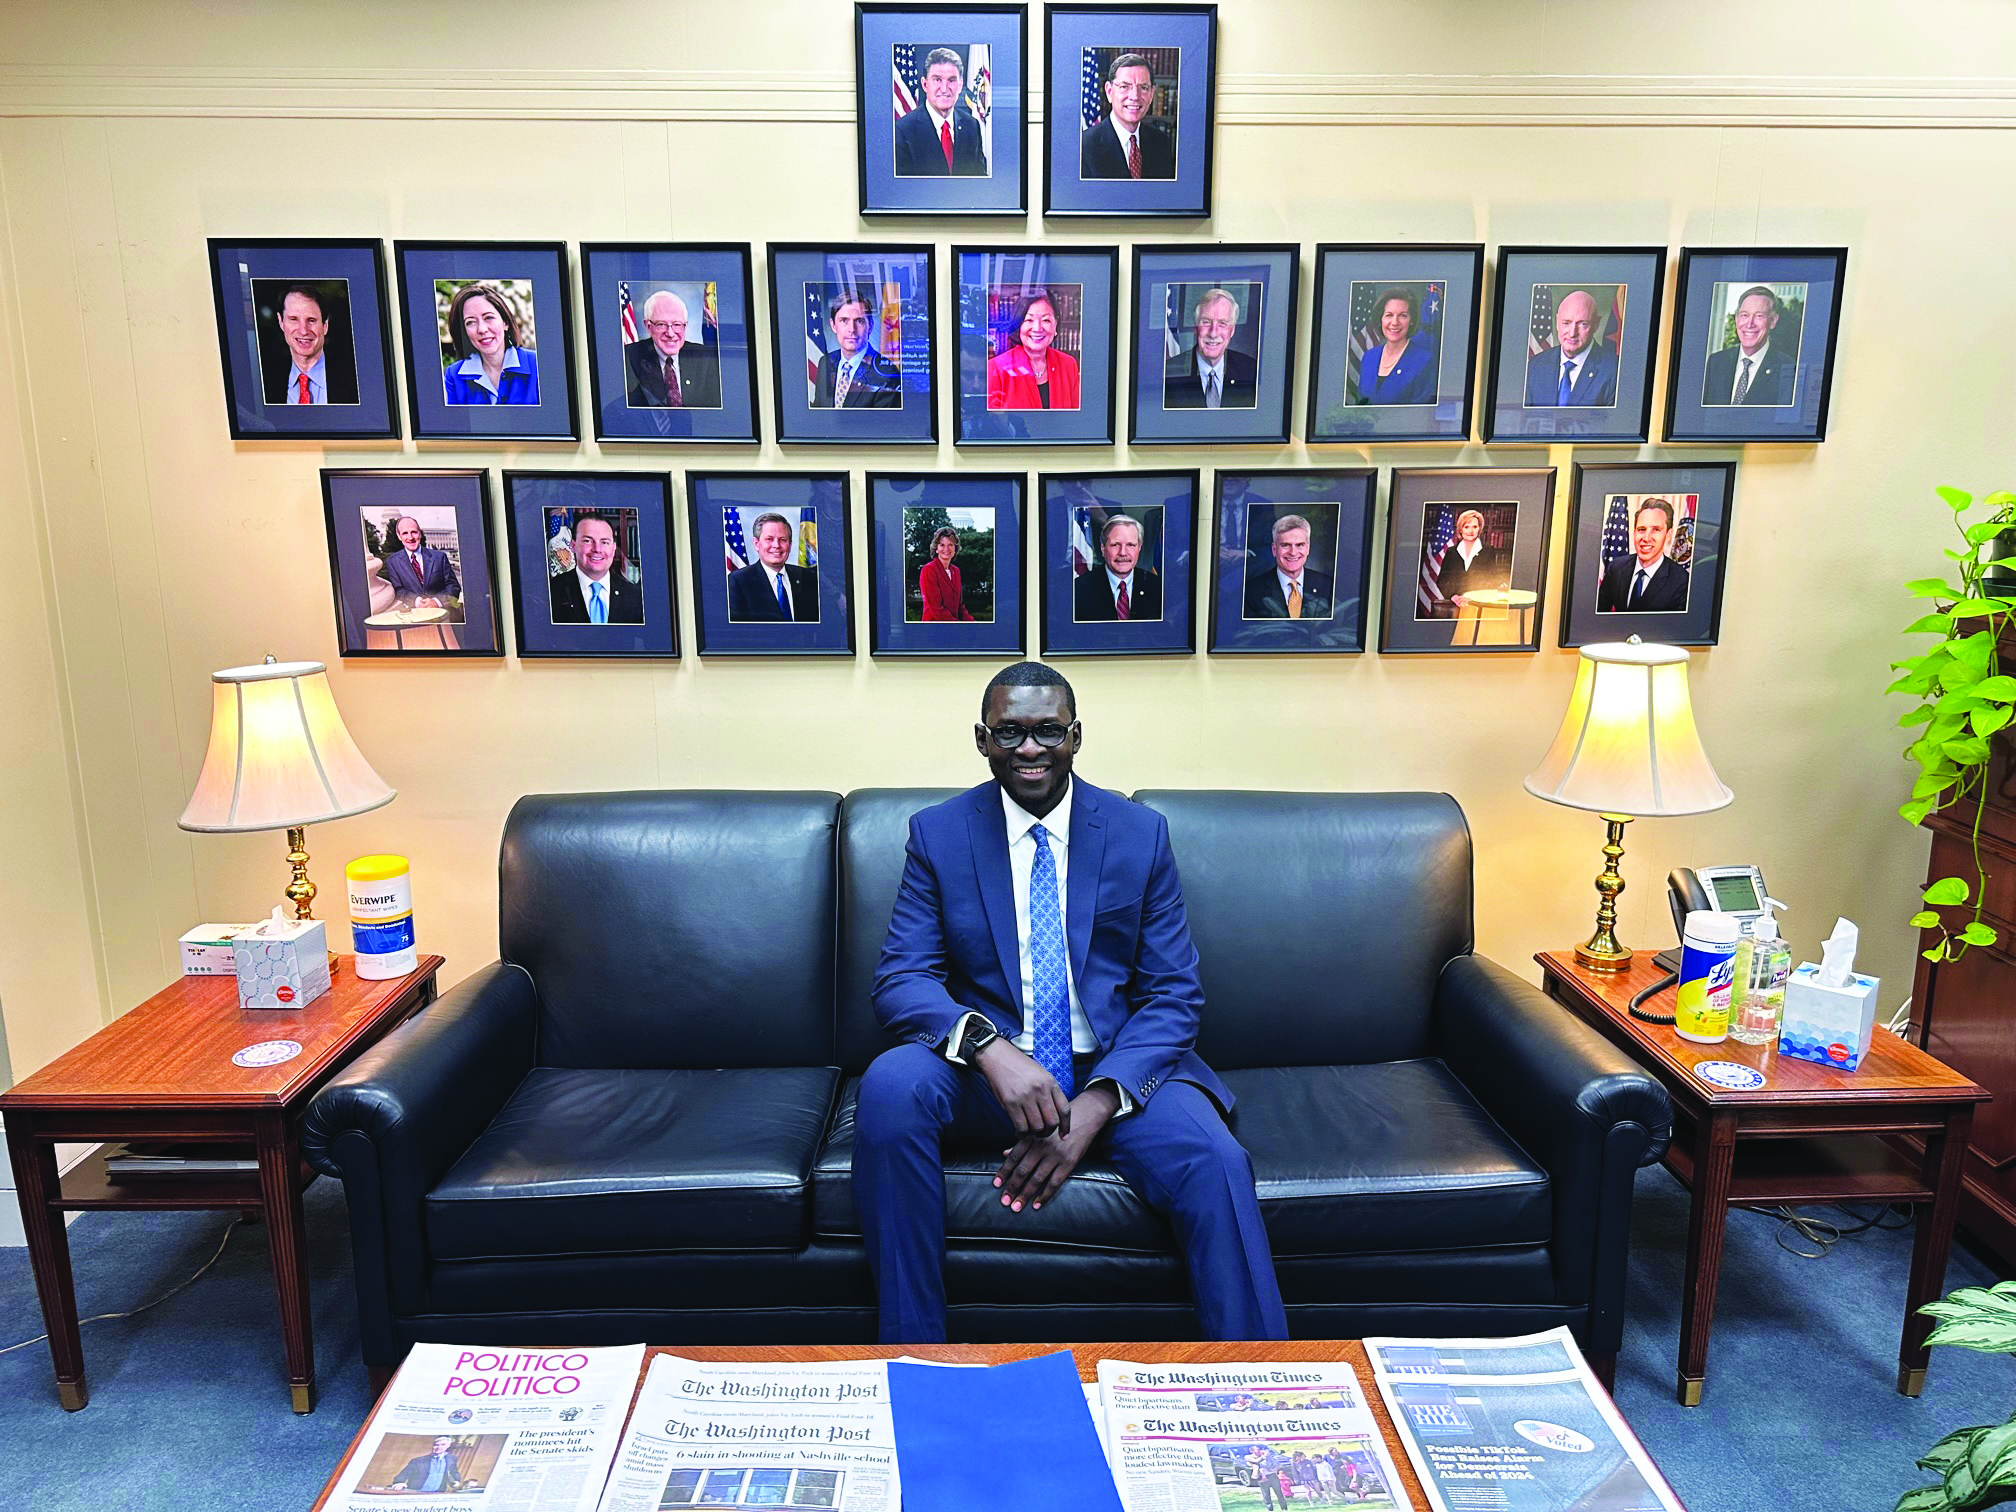 SIAM Science Policy Fellowship recipient Bashir Mohammed takes part in a Congressional visit to the office of the U.S. Senate Committee on Energy and Natural Resources in Washington, D.C. Photo courtesy of Griffin Reinecke.